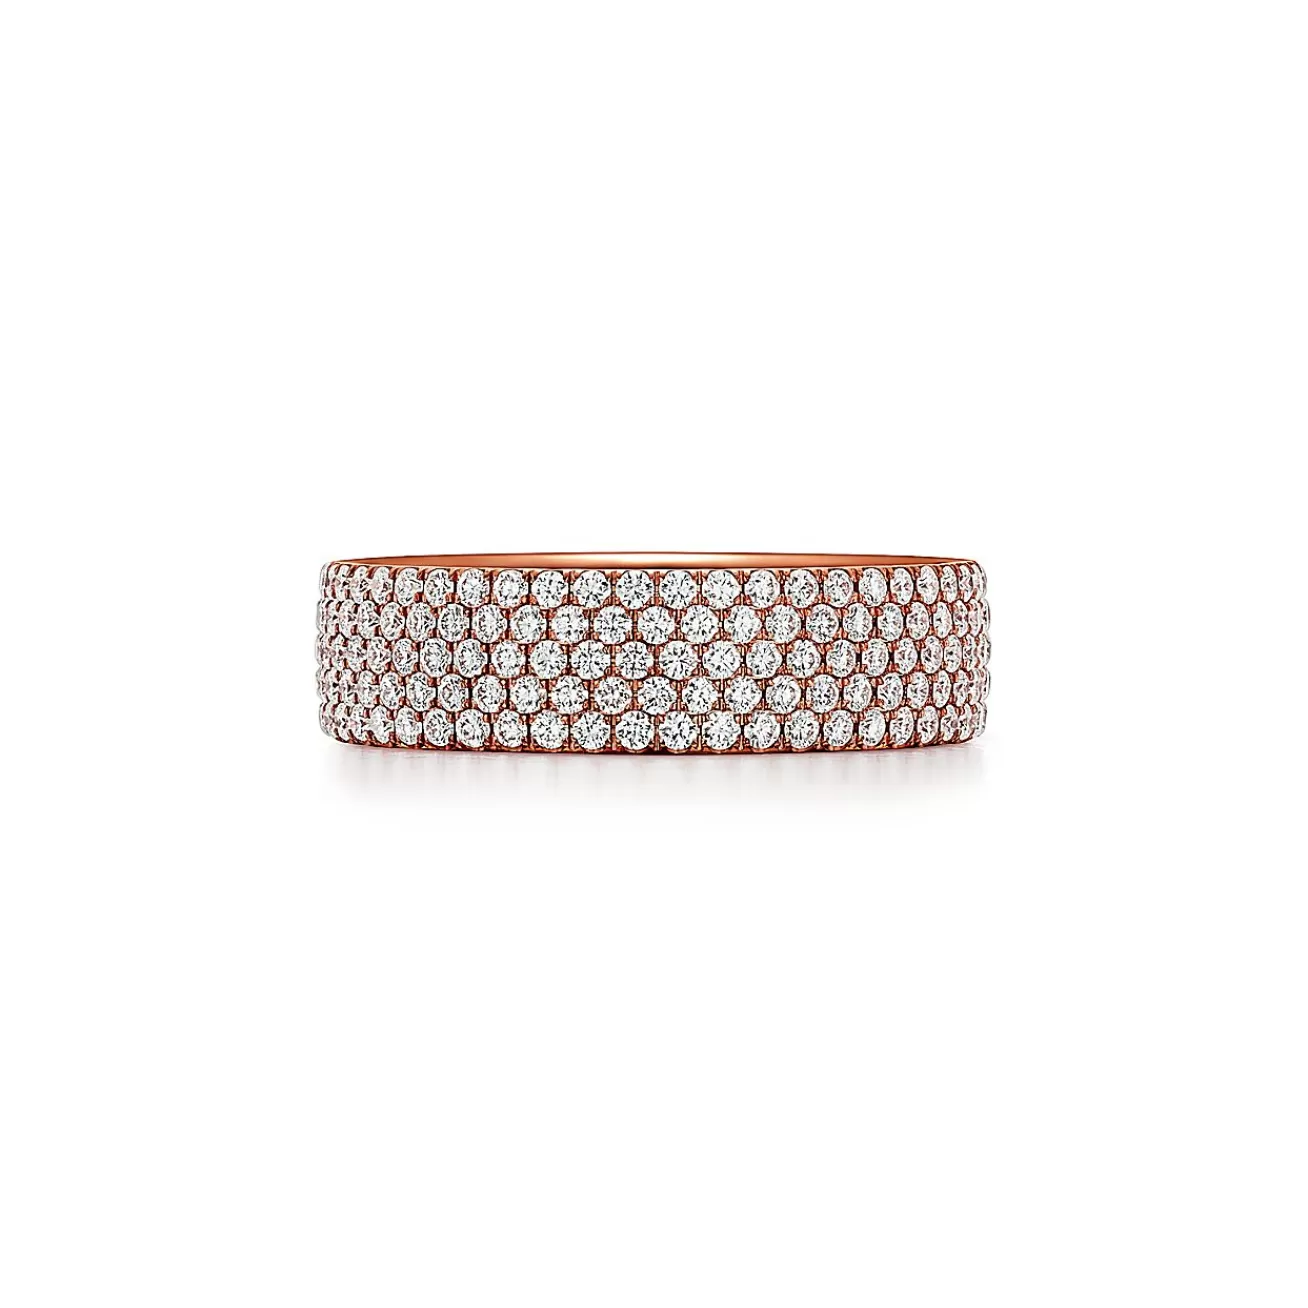 Tiffany & Co. Tiffany Metro Five-row Ring in Rose Gold with Diamonds | ^ Rings | Stacking Rings